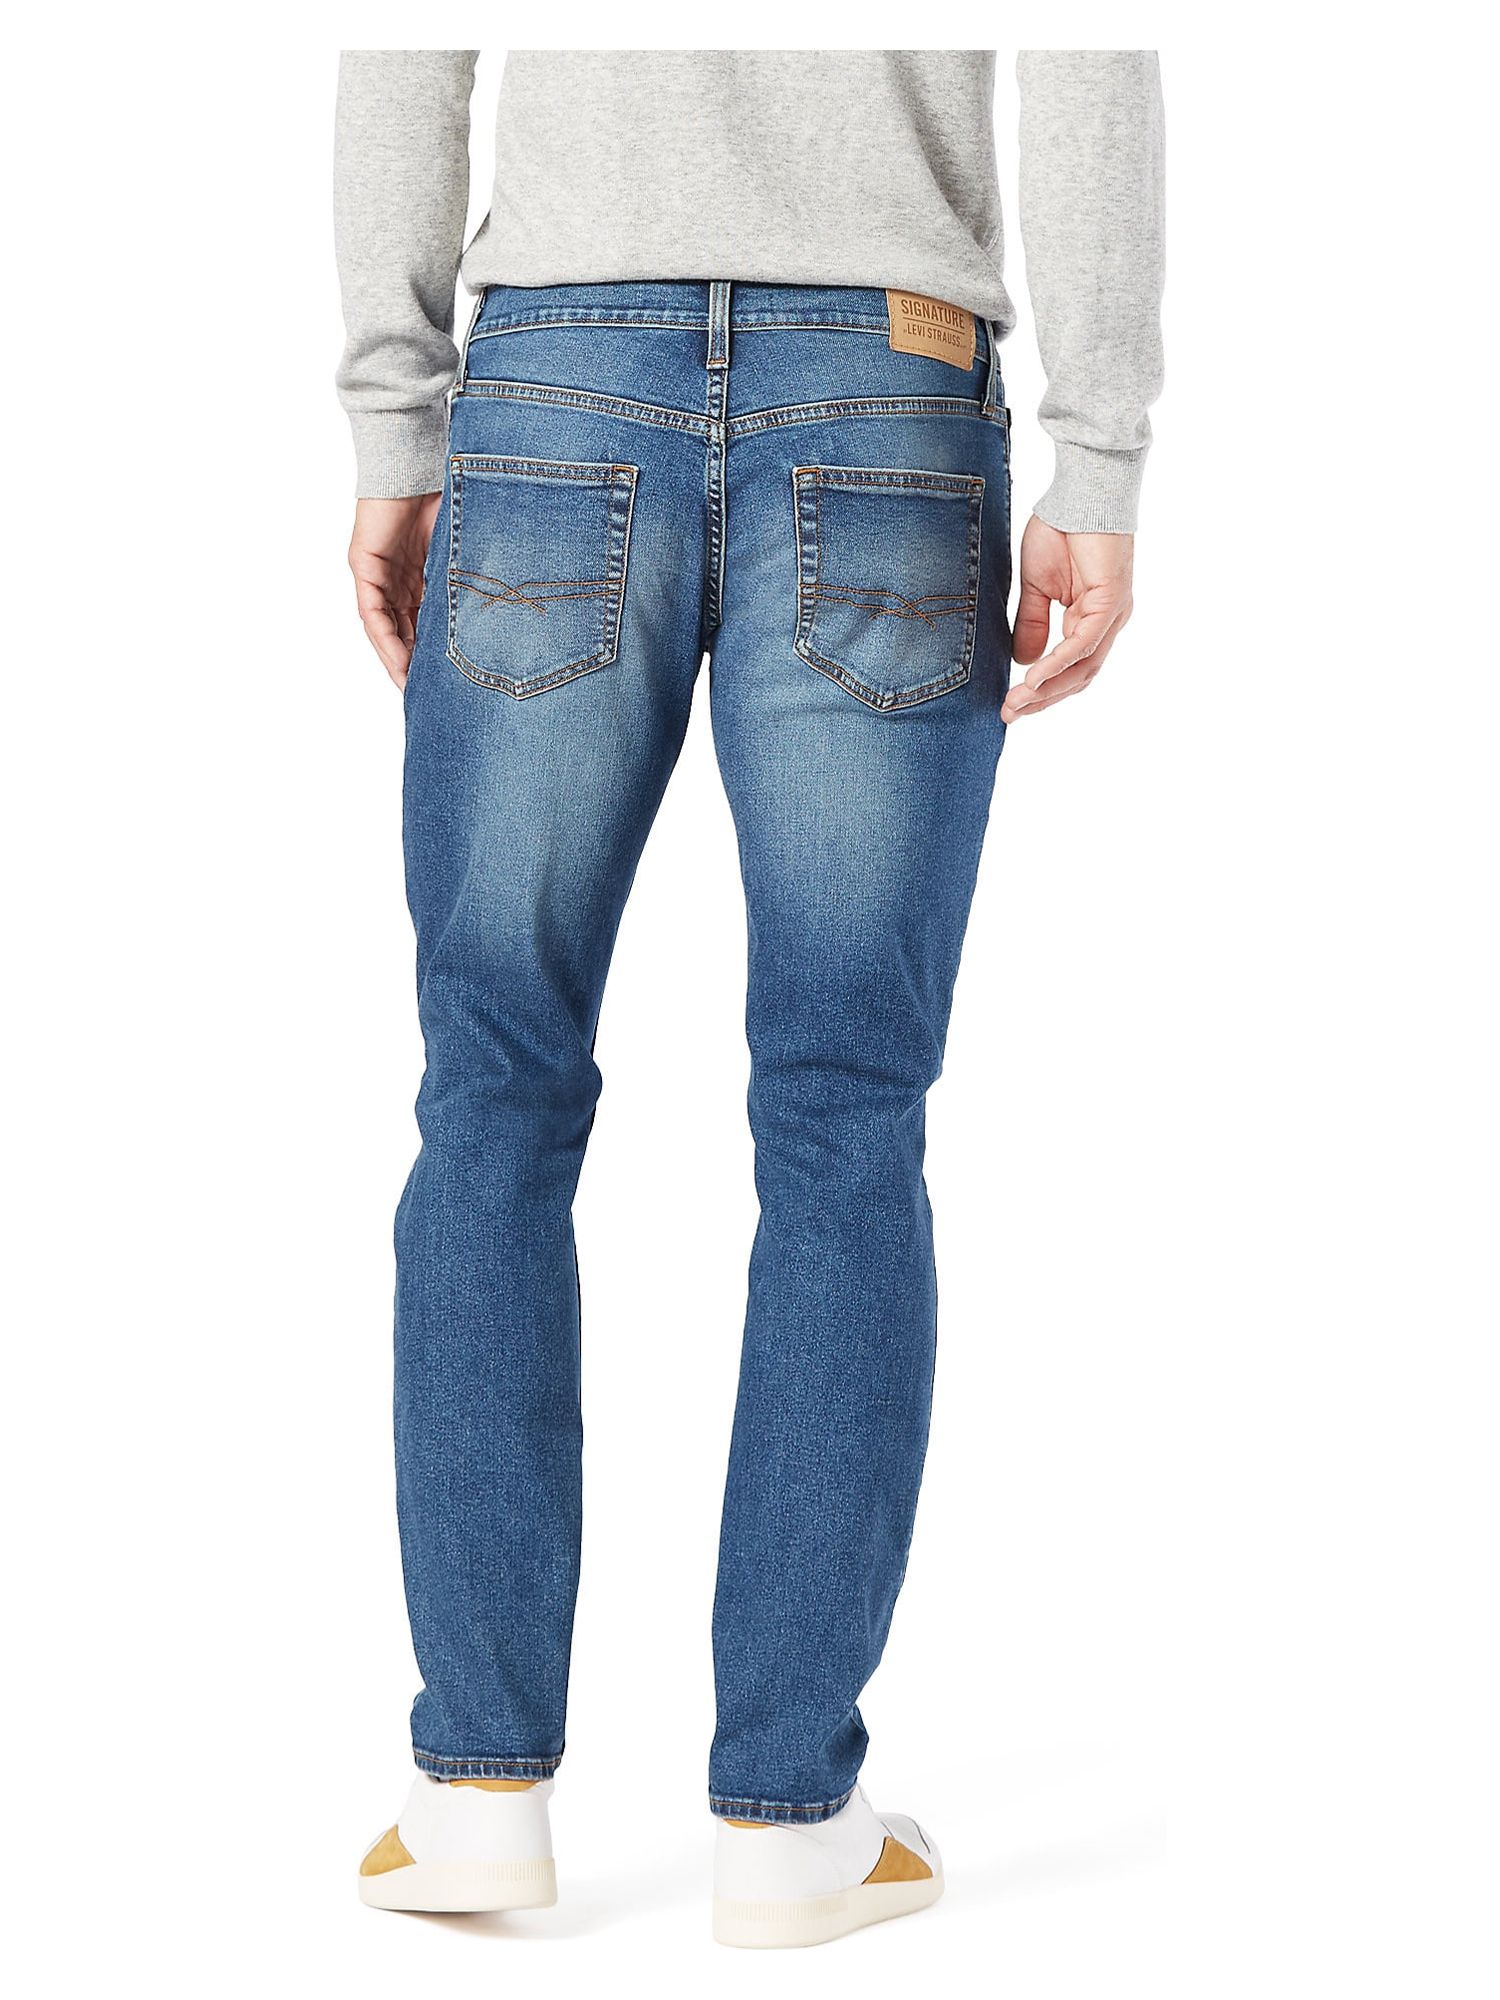 Signature by Levi Strauss & Co. Men’s and Big and Tall Slim Fit Jeans - image 2 of 5